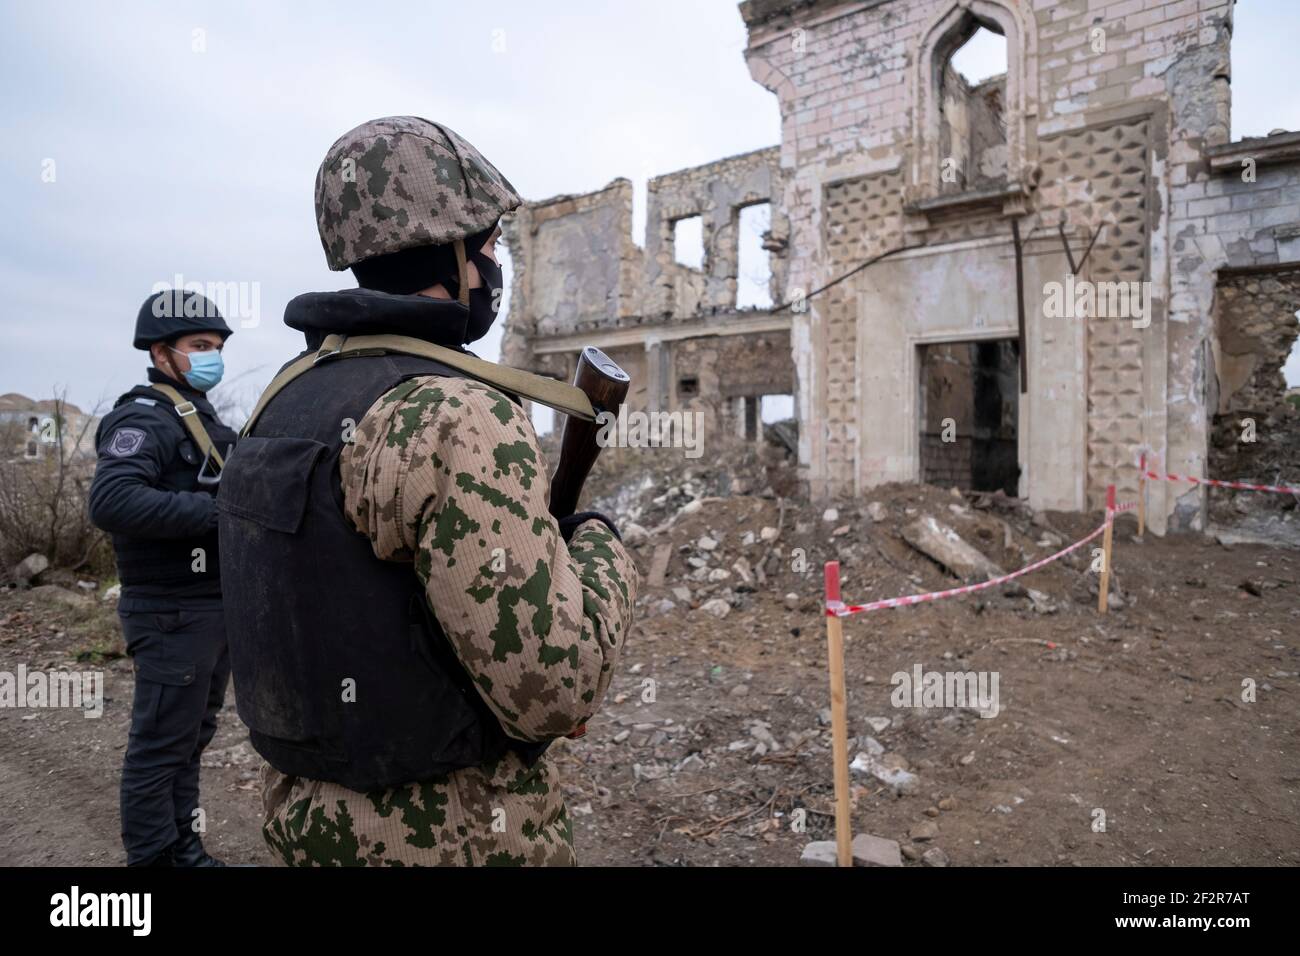 AGDAM, AZERBAIJAN - DECEMBER 14: Azerbaijani servicemen looking at a ruined building in the town of Agdam which was destroyed by Armenian forces during the First Nagorno-Karabakh War on December 14, 2020 in Agdam, Azerbaijan. The town and its surrounding district were returned to Azerbaijani control as part of an agreement that ended the 2020 Nagorno-Karabakh War. Stock Photo